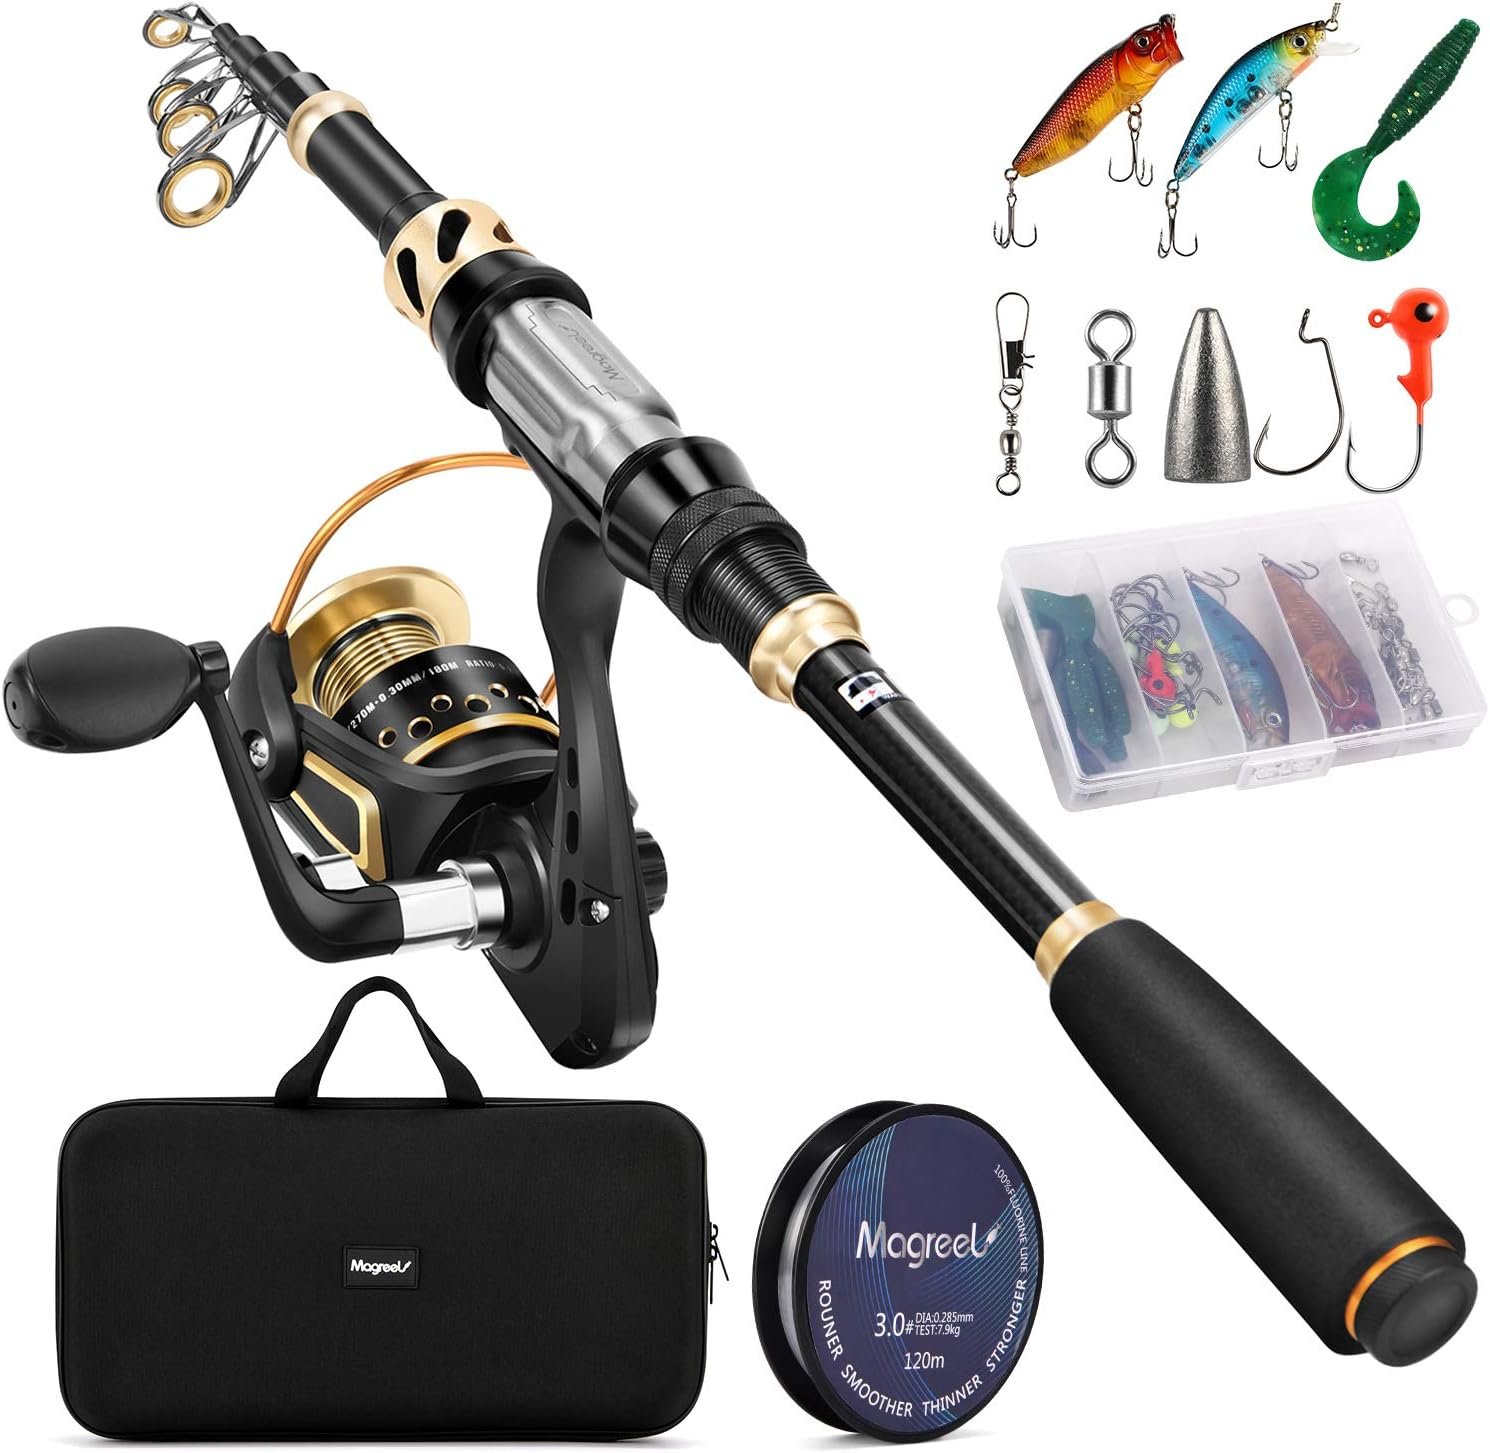 Magreel Fishing Rod, Telescopic Fishing Spinning Reel Combo Set with  Fishing Line, Fishing Lure Set, Accessories and Carry Bag for Saltwater,  Freshwater 